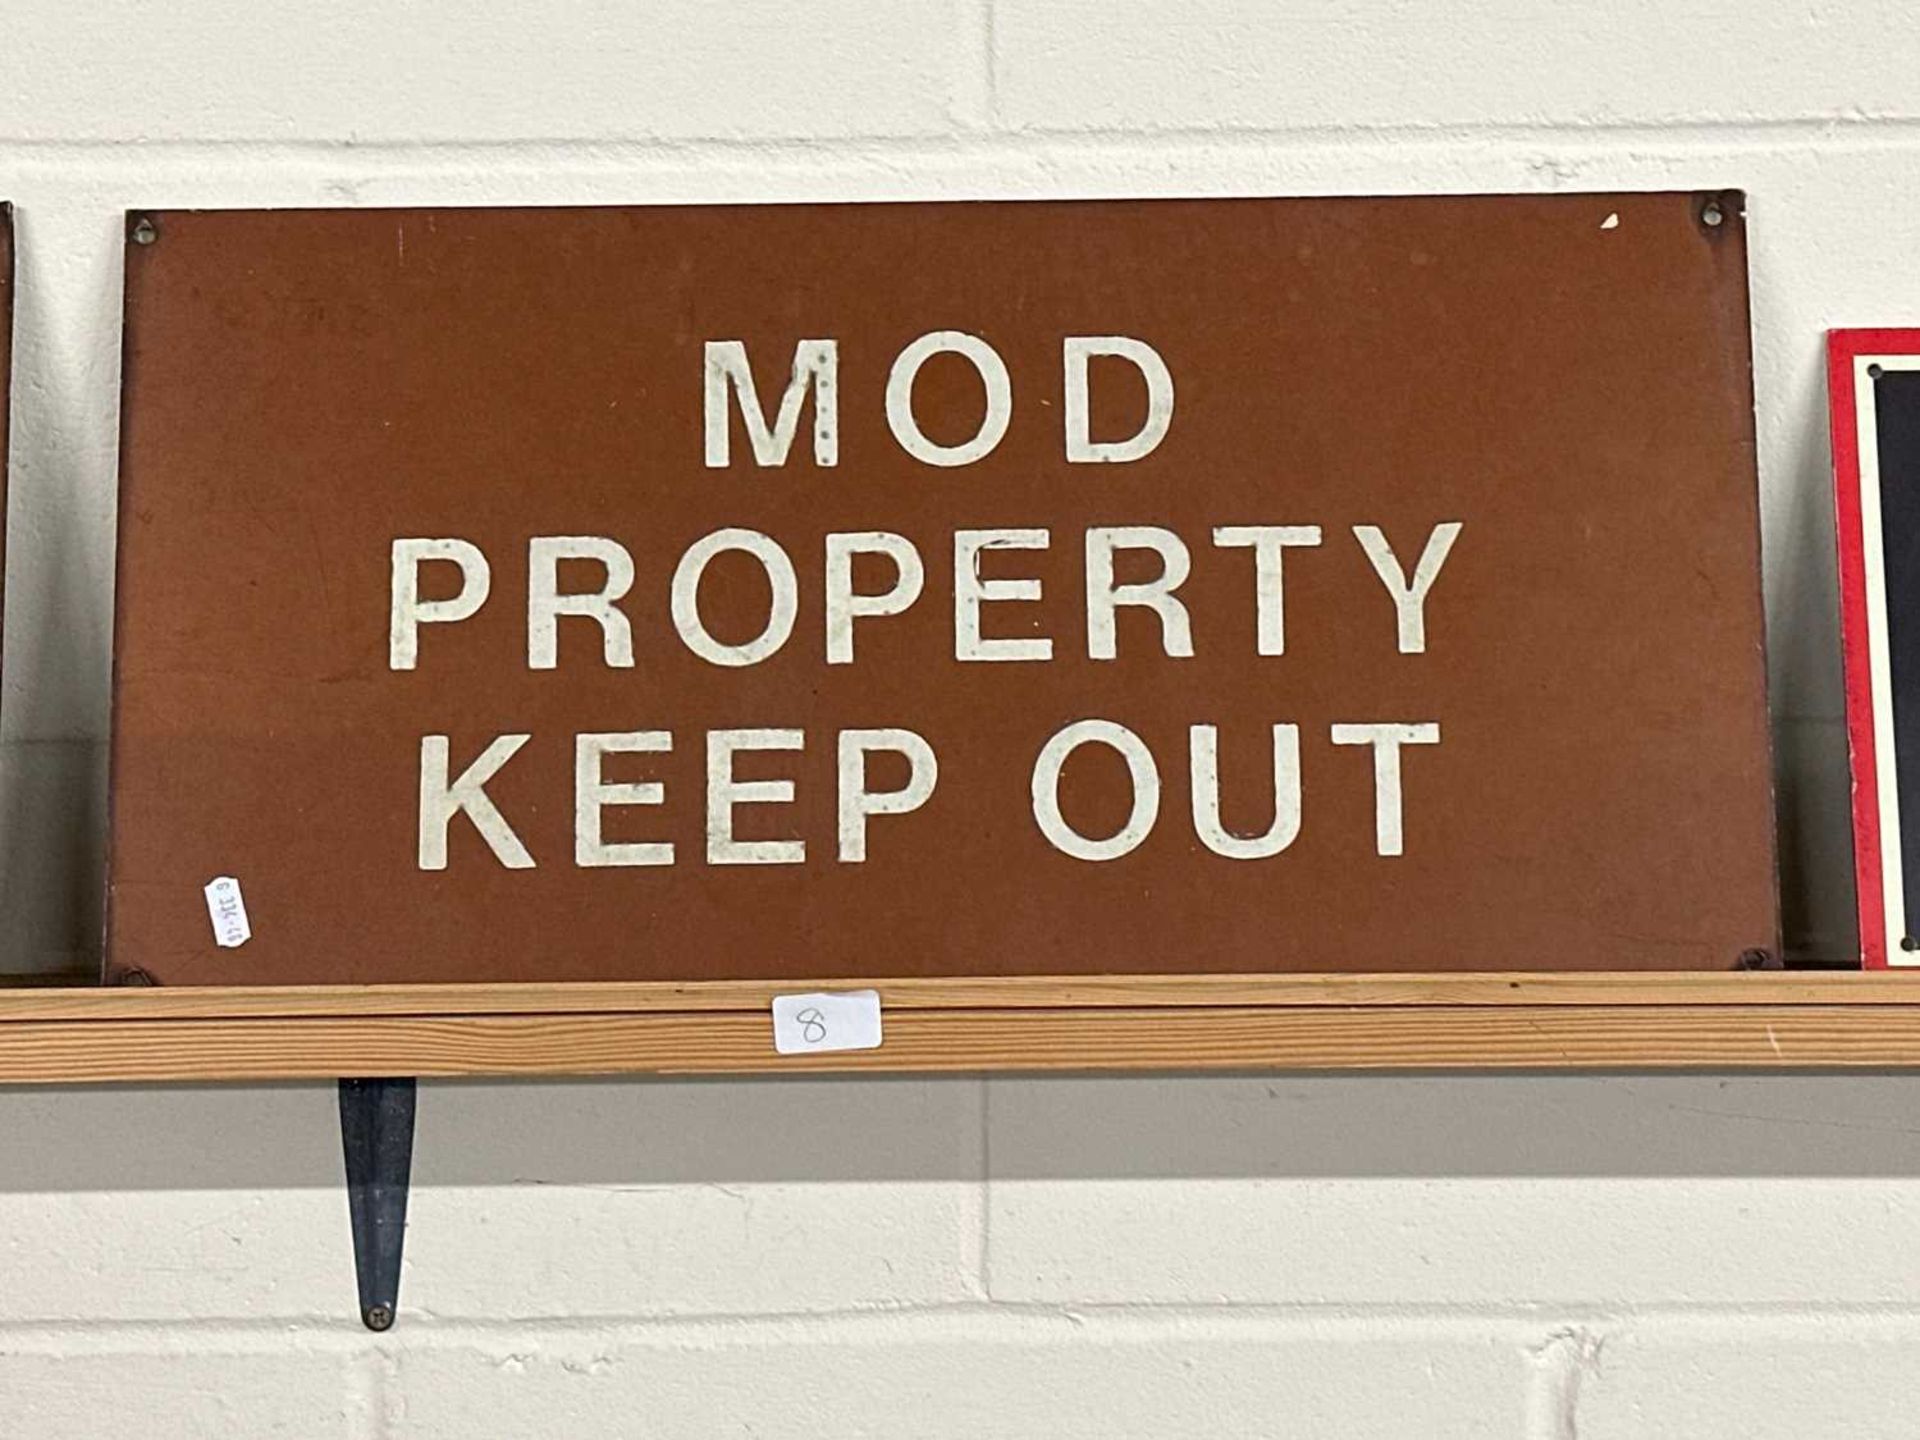 Metal ex Ministry of Defence sign "MOD Property - Keep Out"